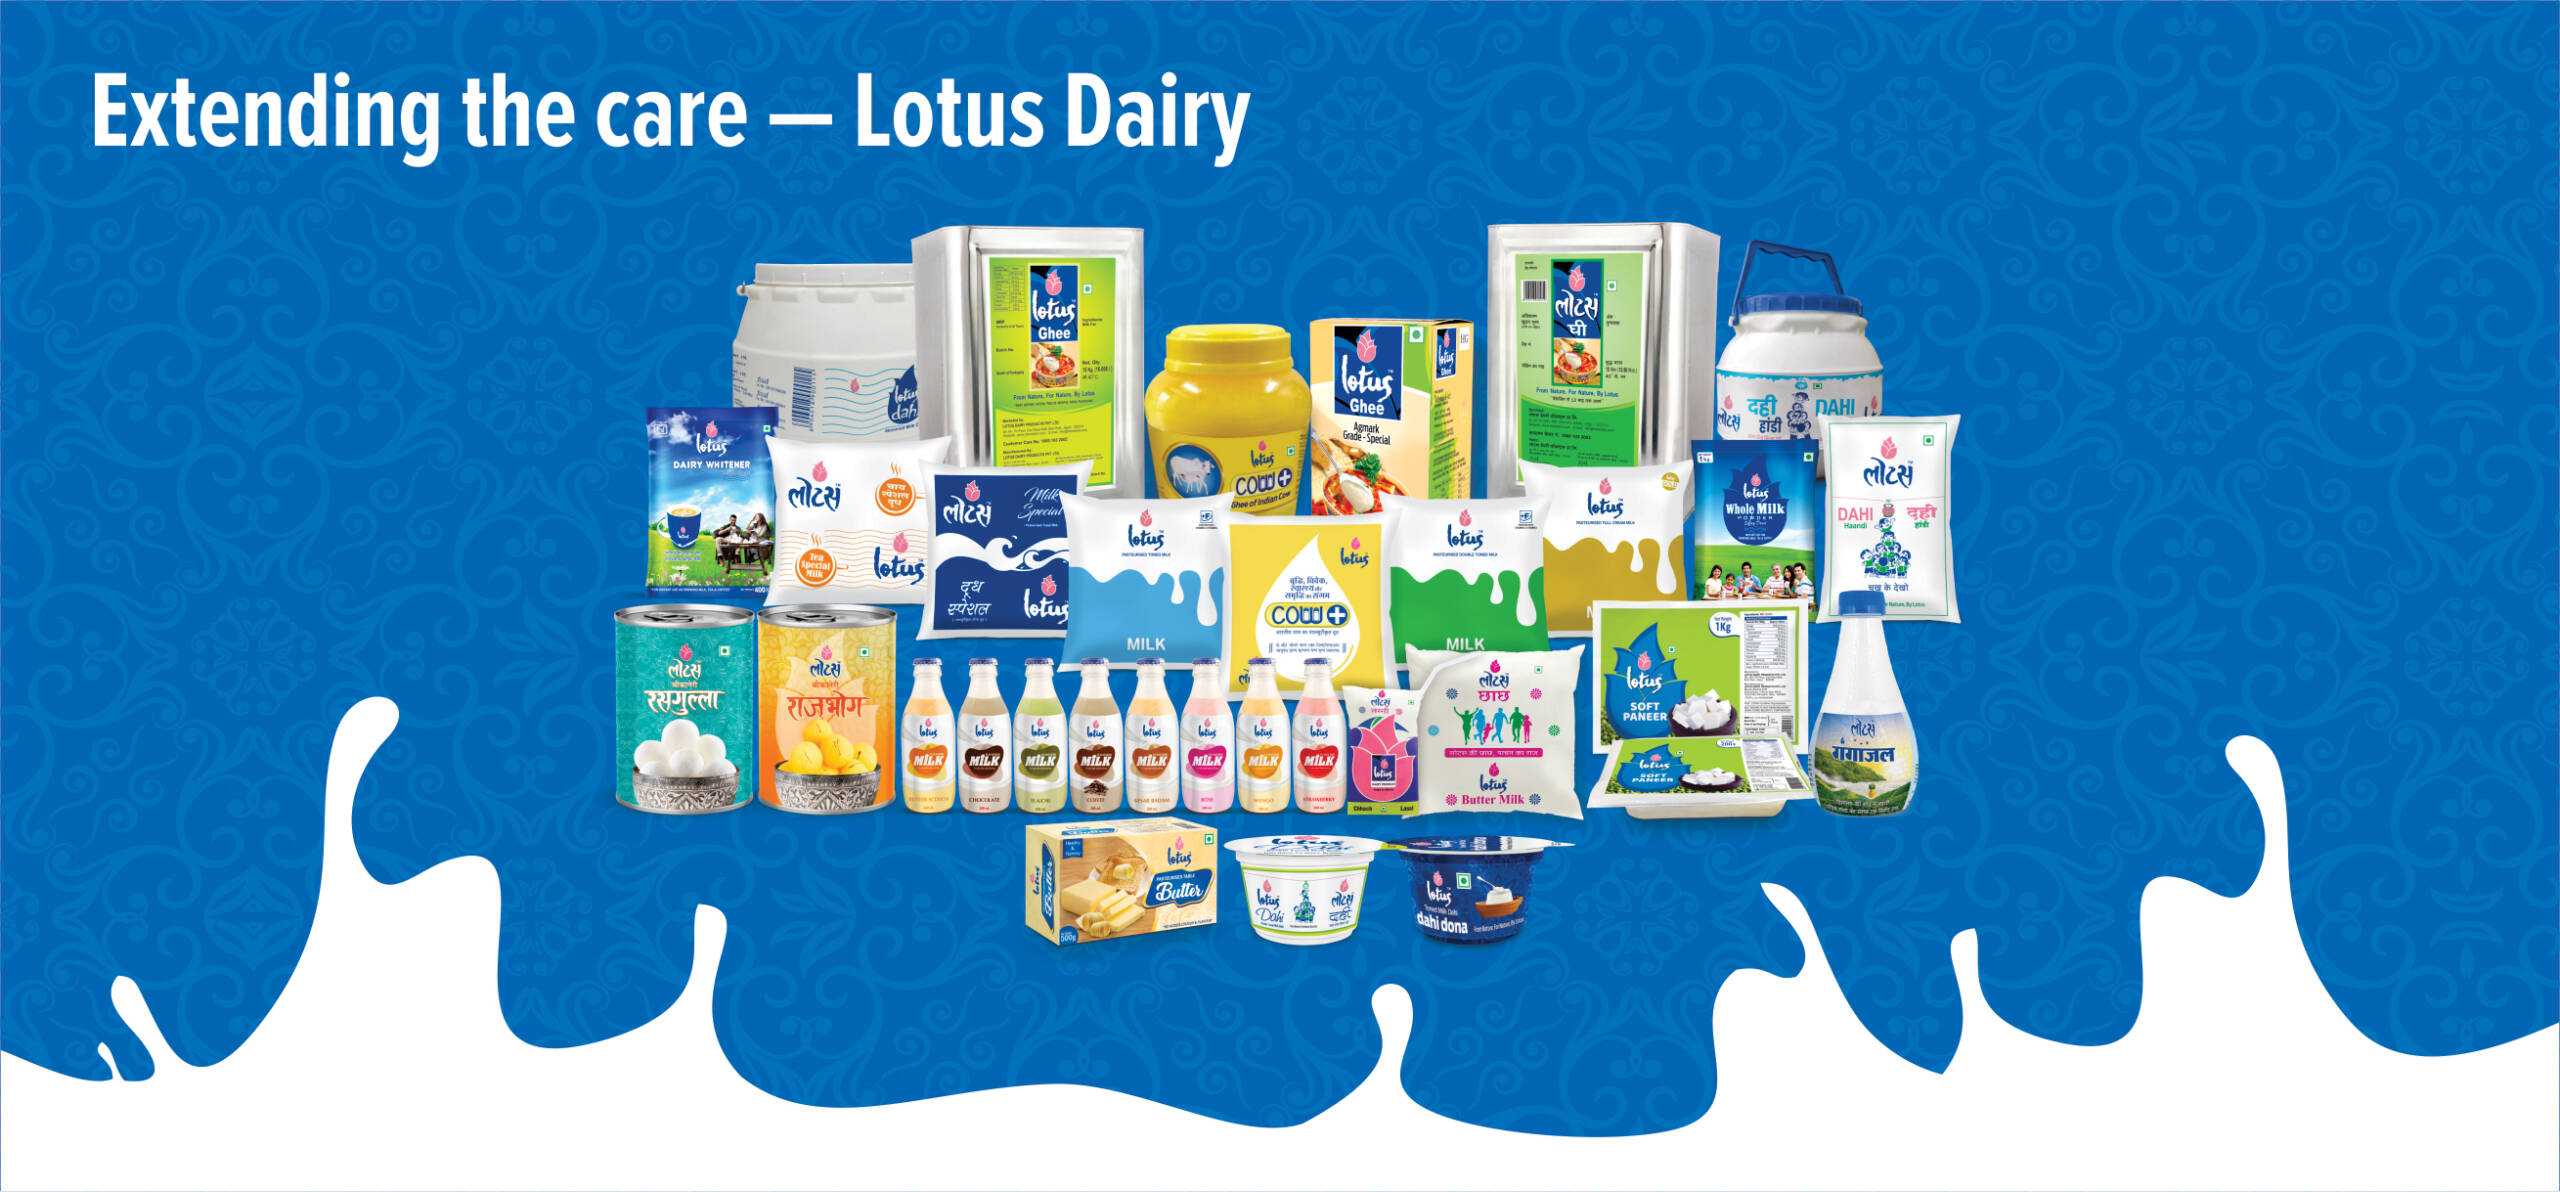 Extending the care - Lotus Dairy (2)